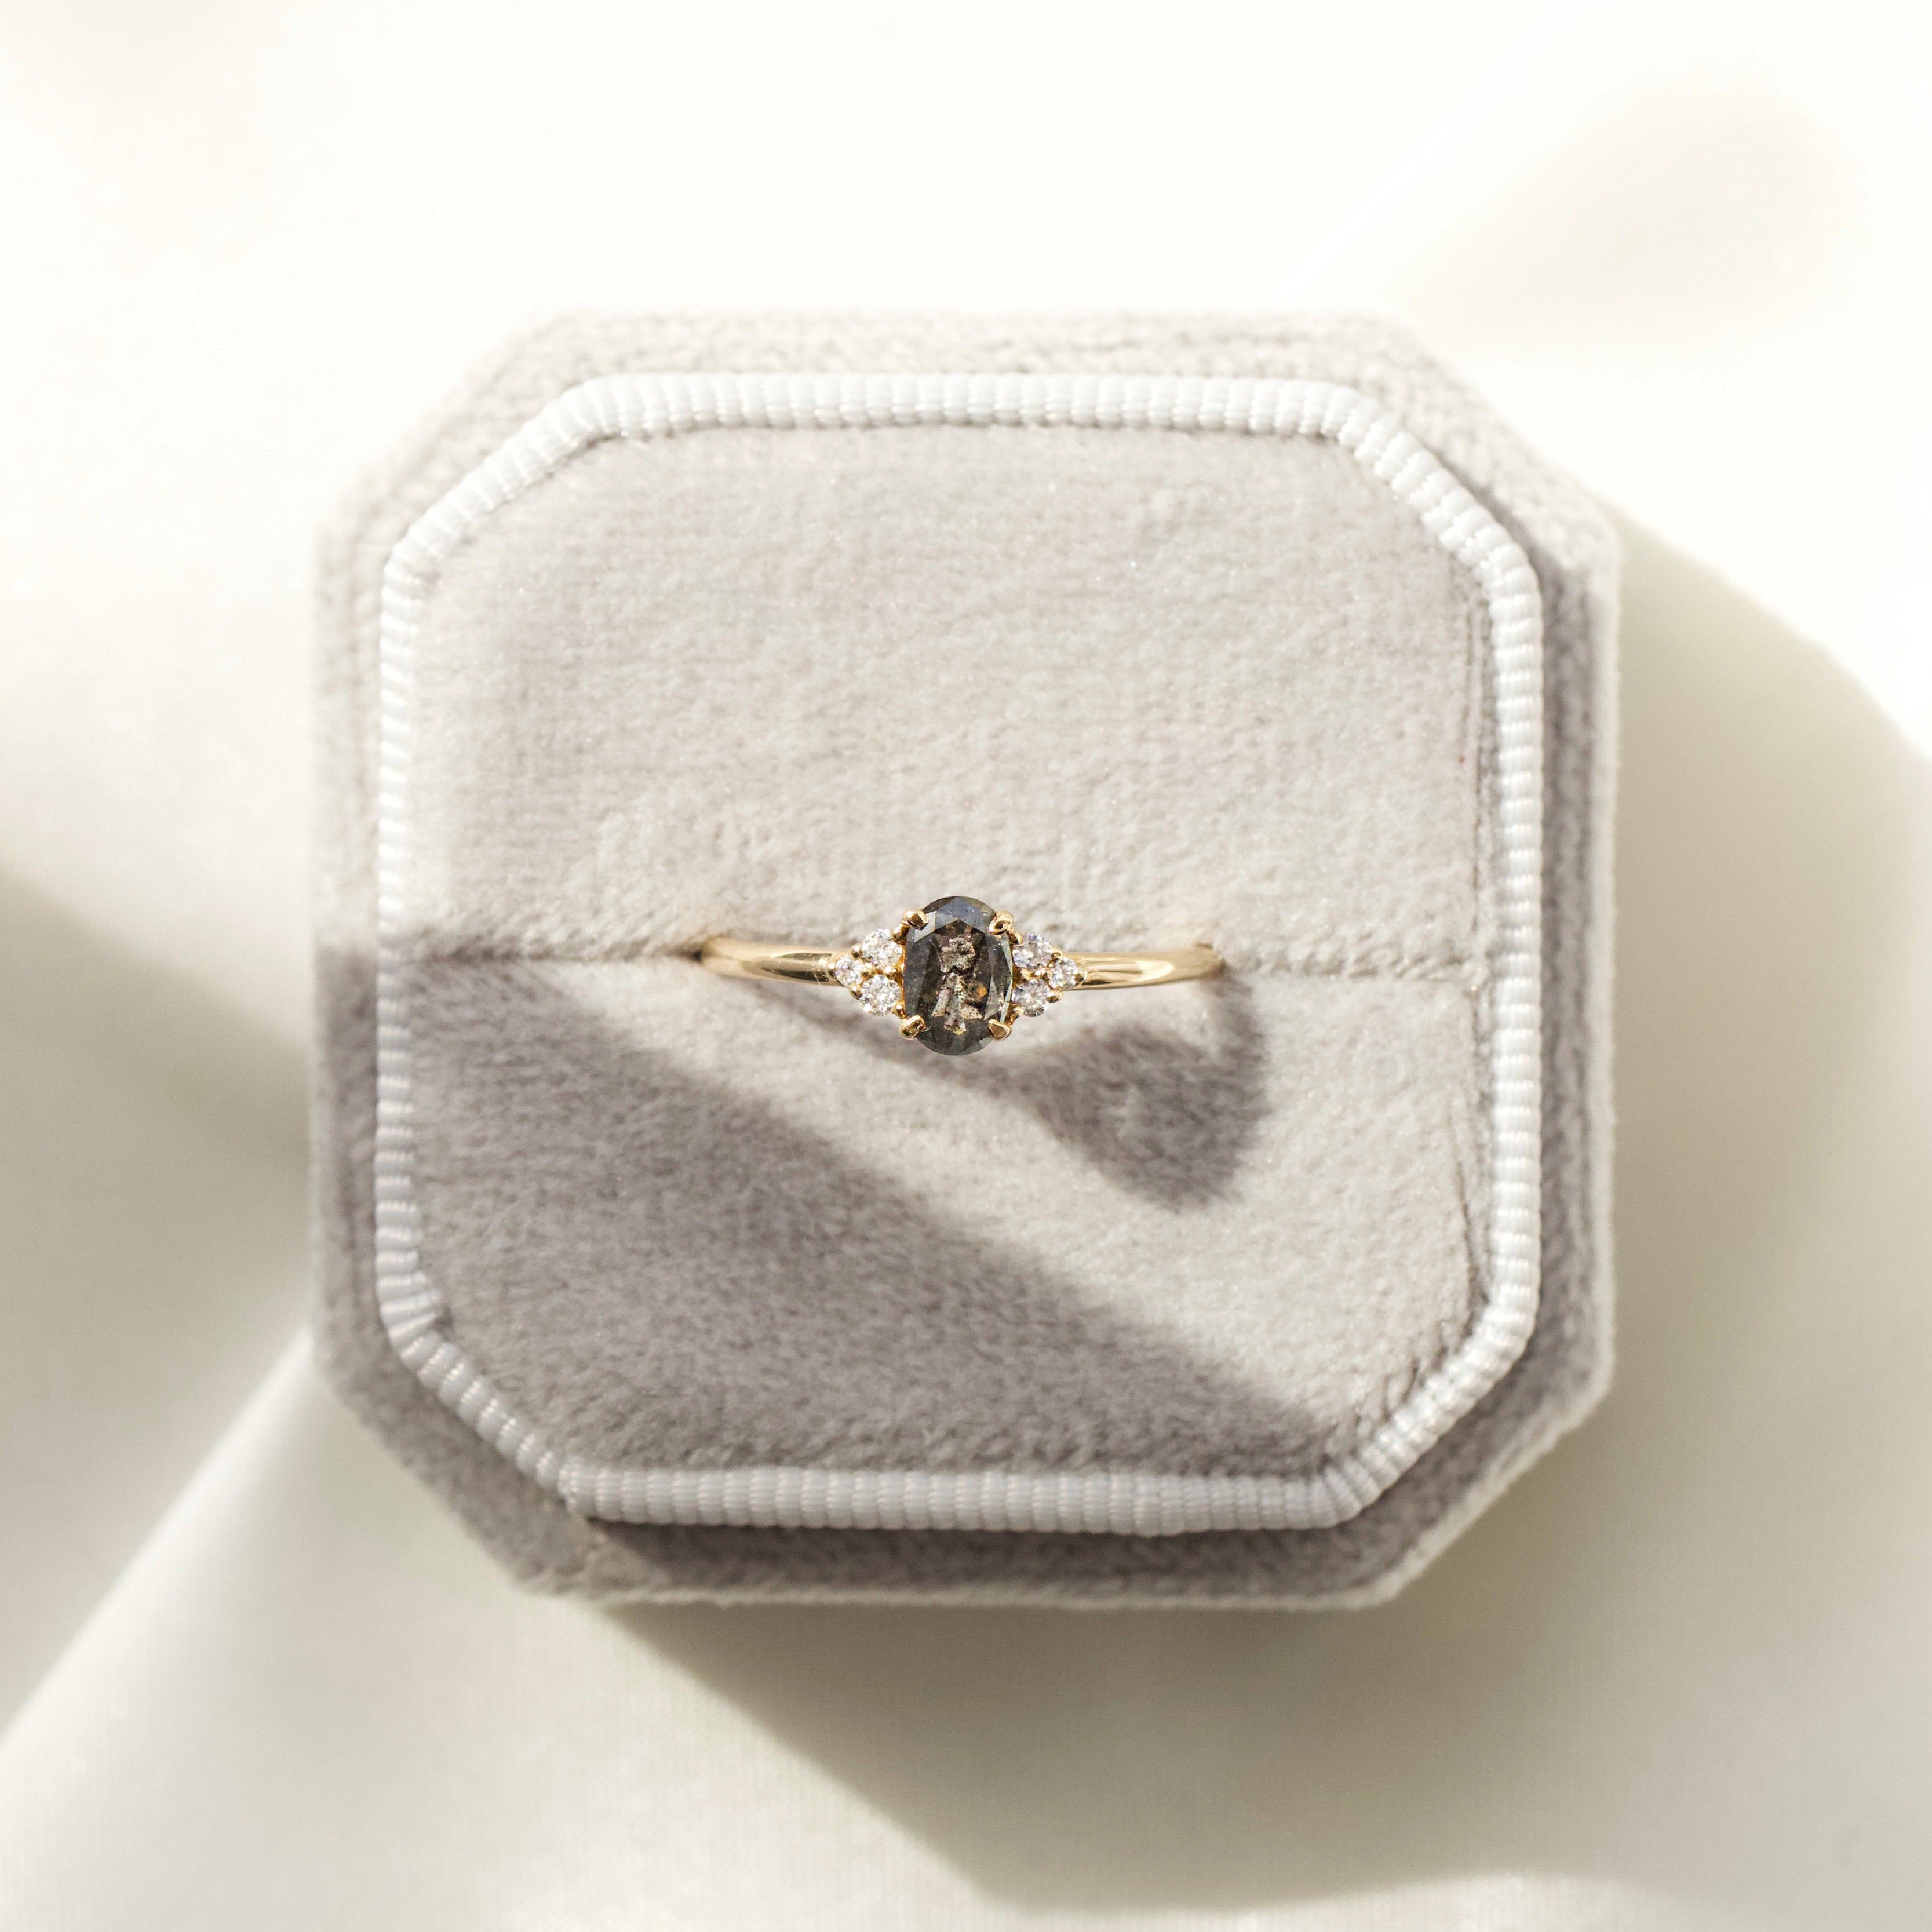 What Does a Black Diamond Wedding Band Mean? - Unique Diamond Engagement  and Wedding Rings